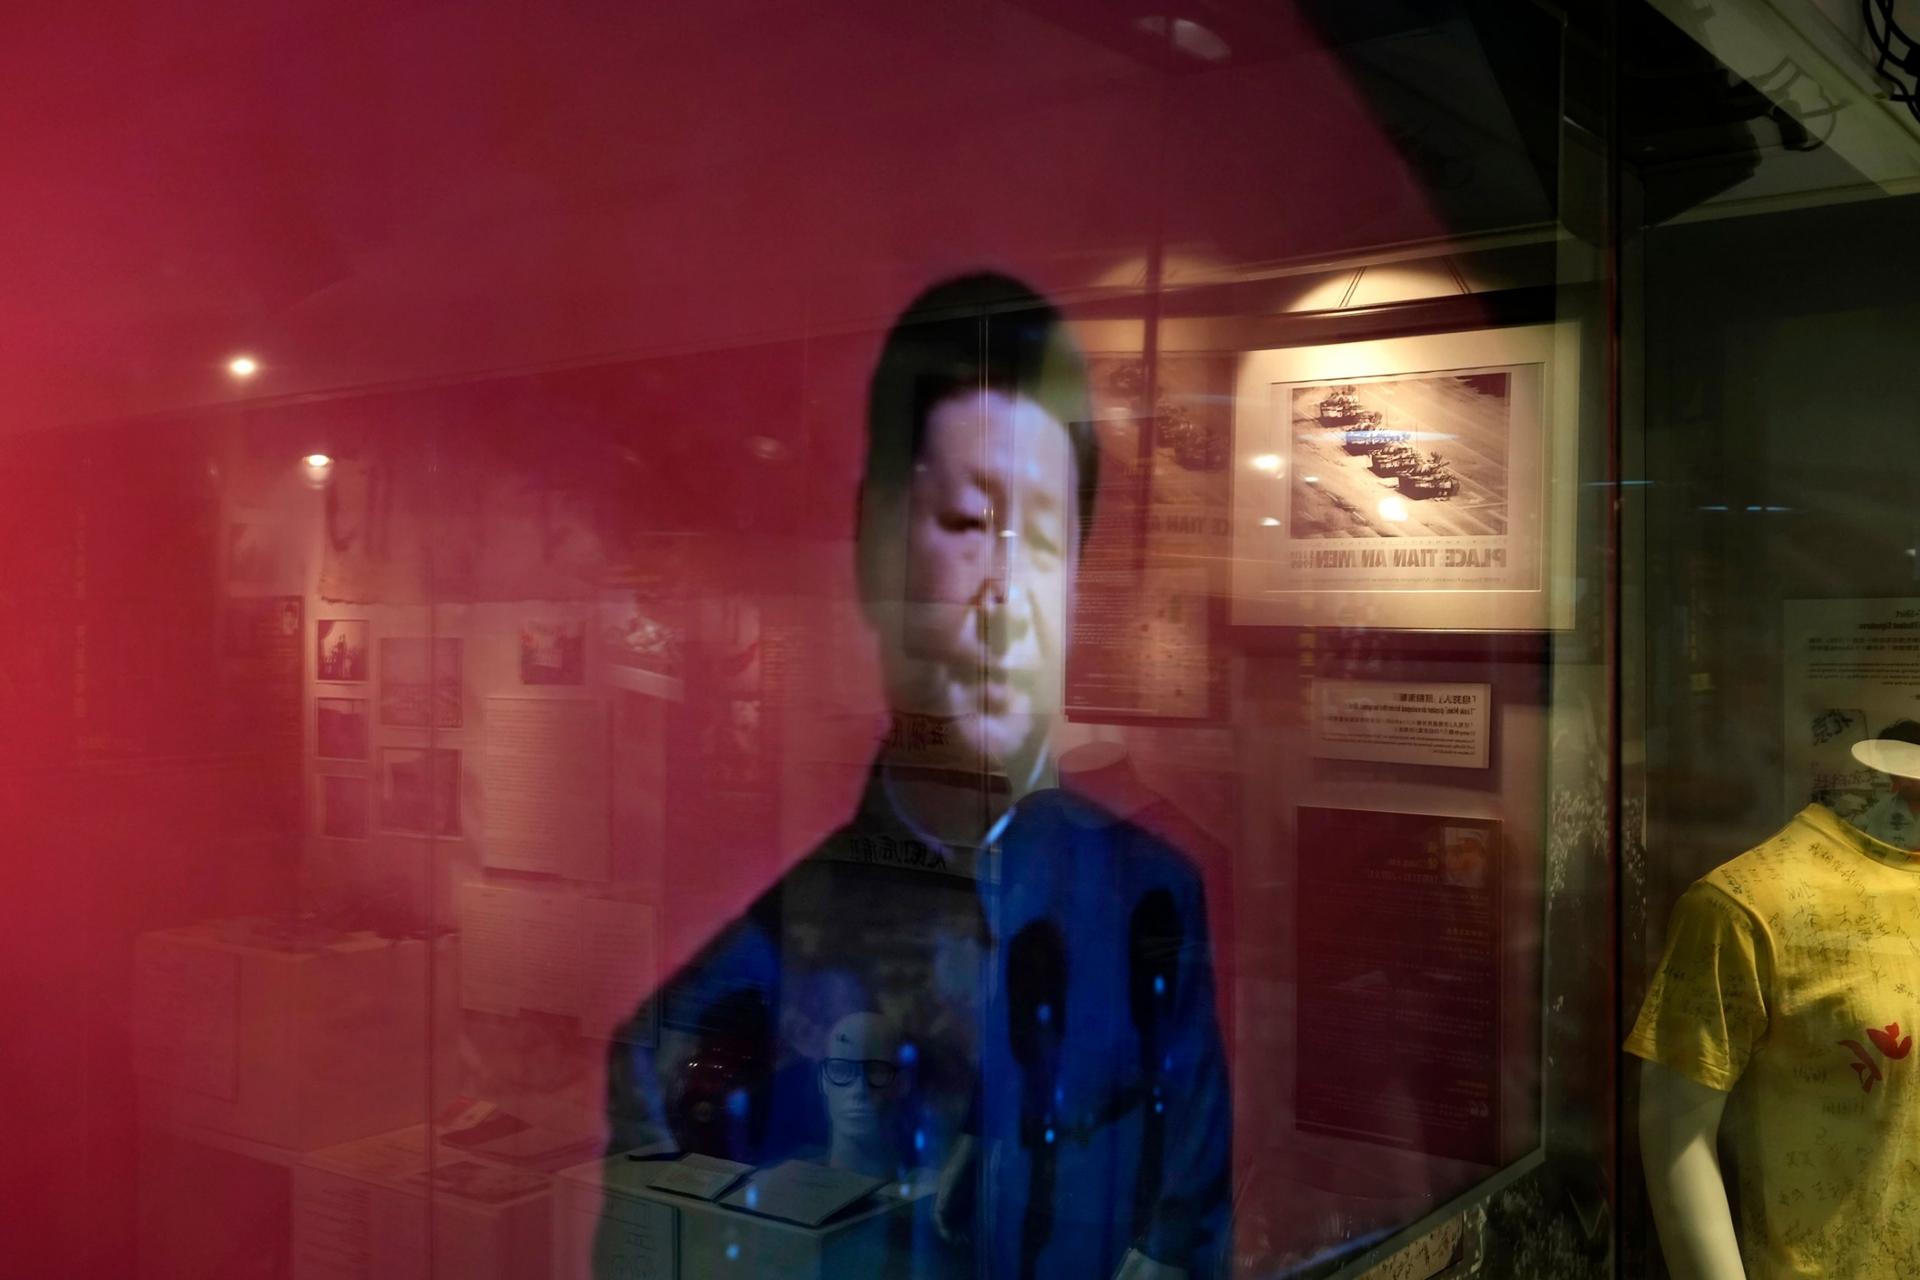 An image of China President Xi Jinping depicted on a red background is shown is shown through glass that's reflecting other Tiananmen Square artifacts.